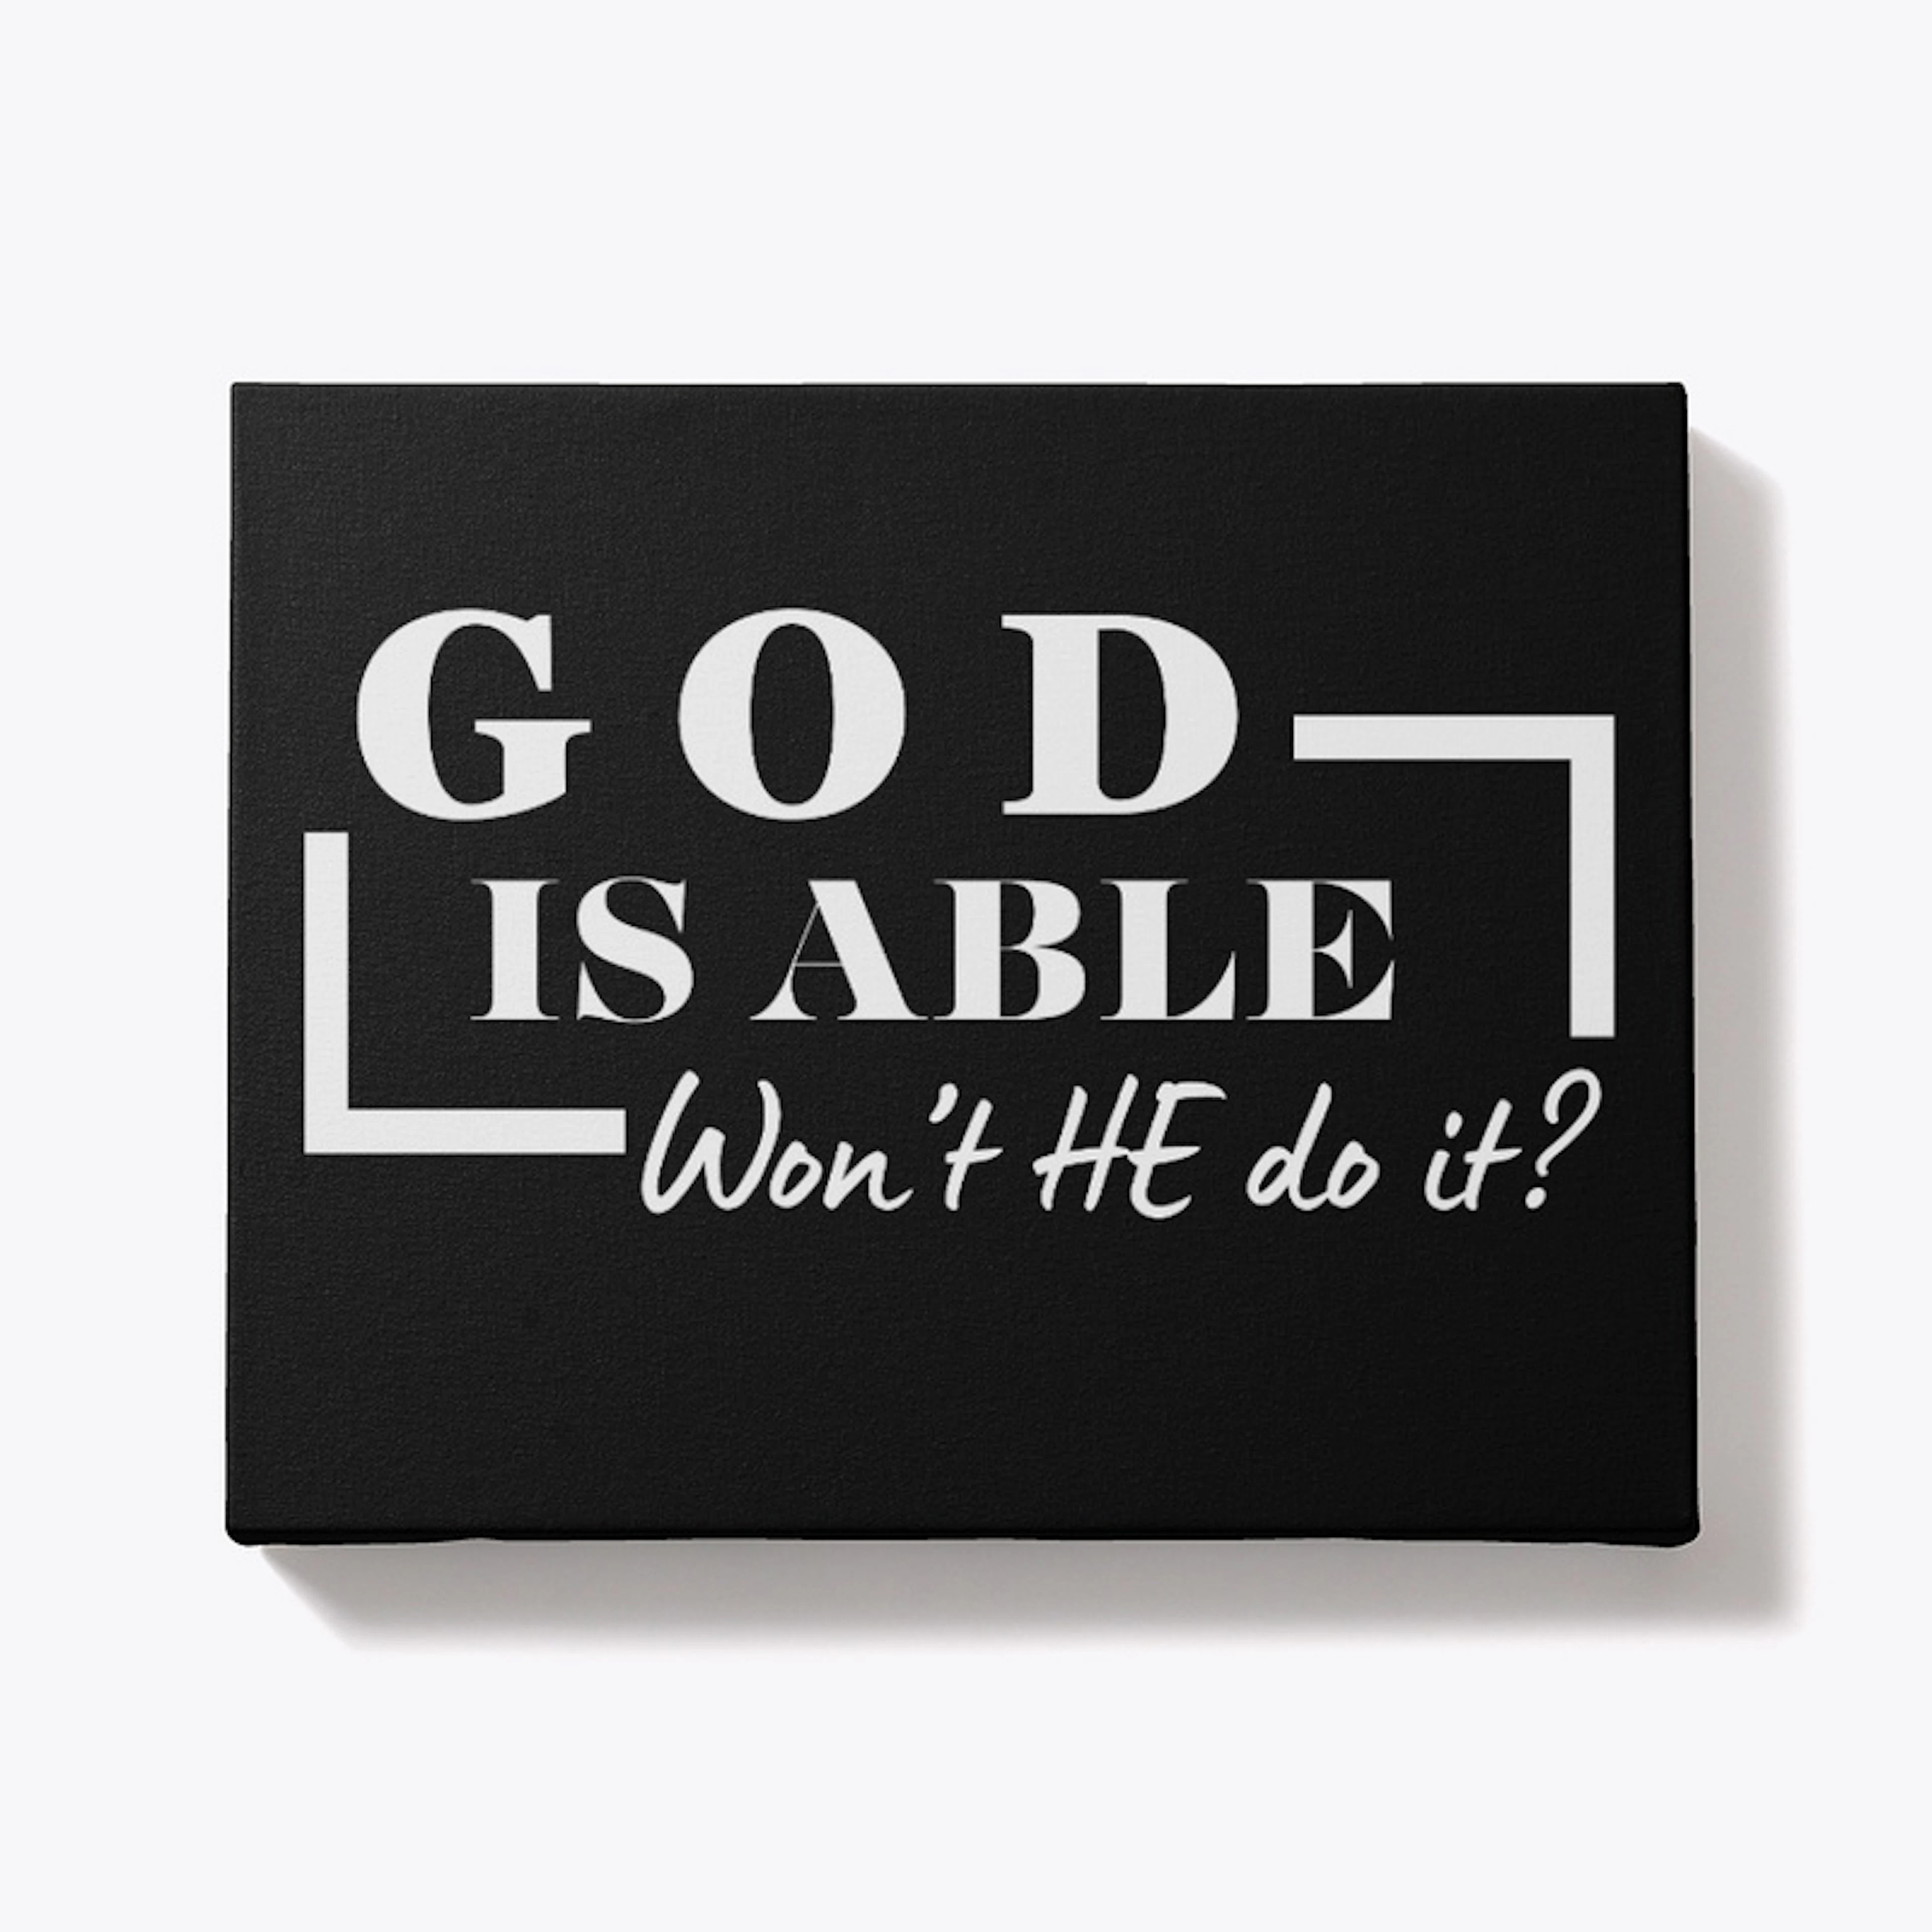 God is Able (Won't HE do it?)